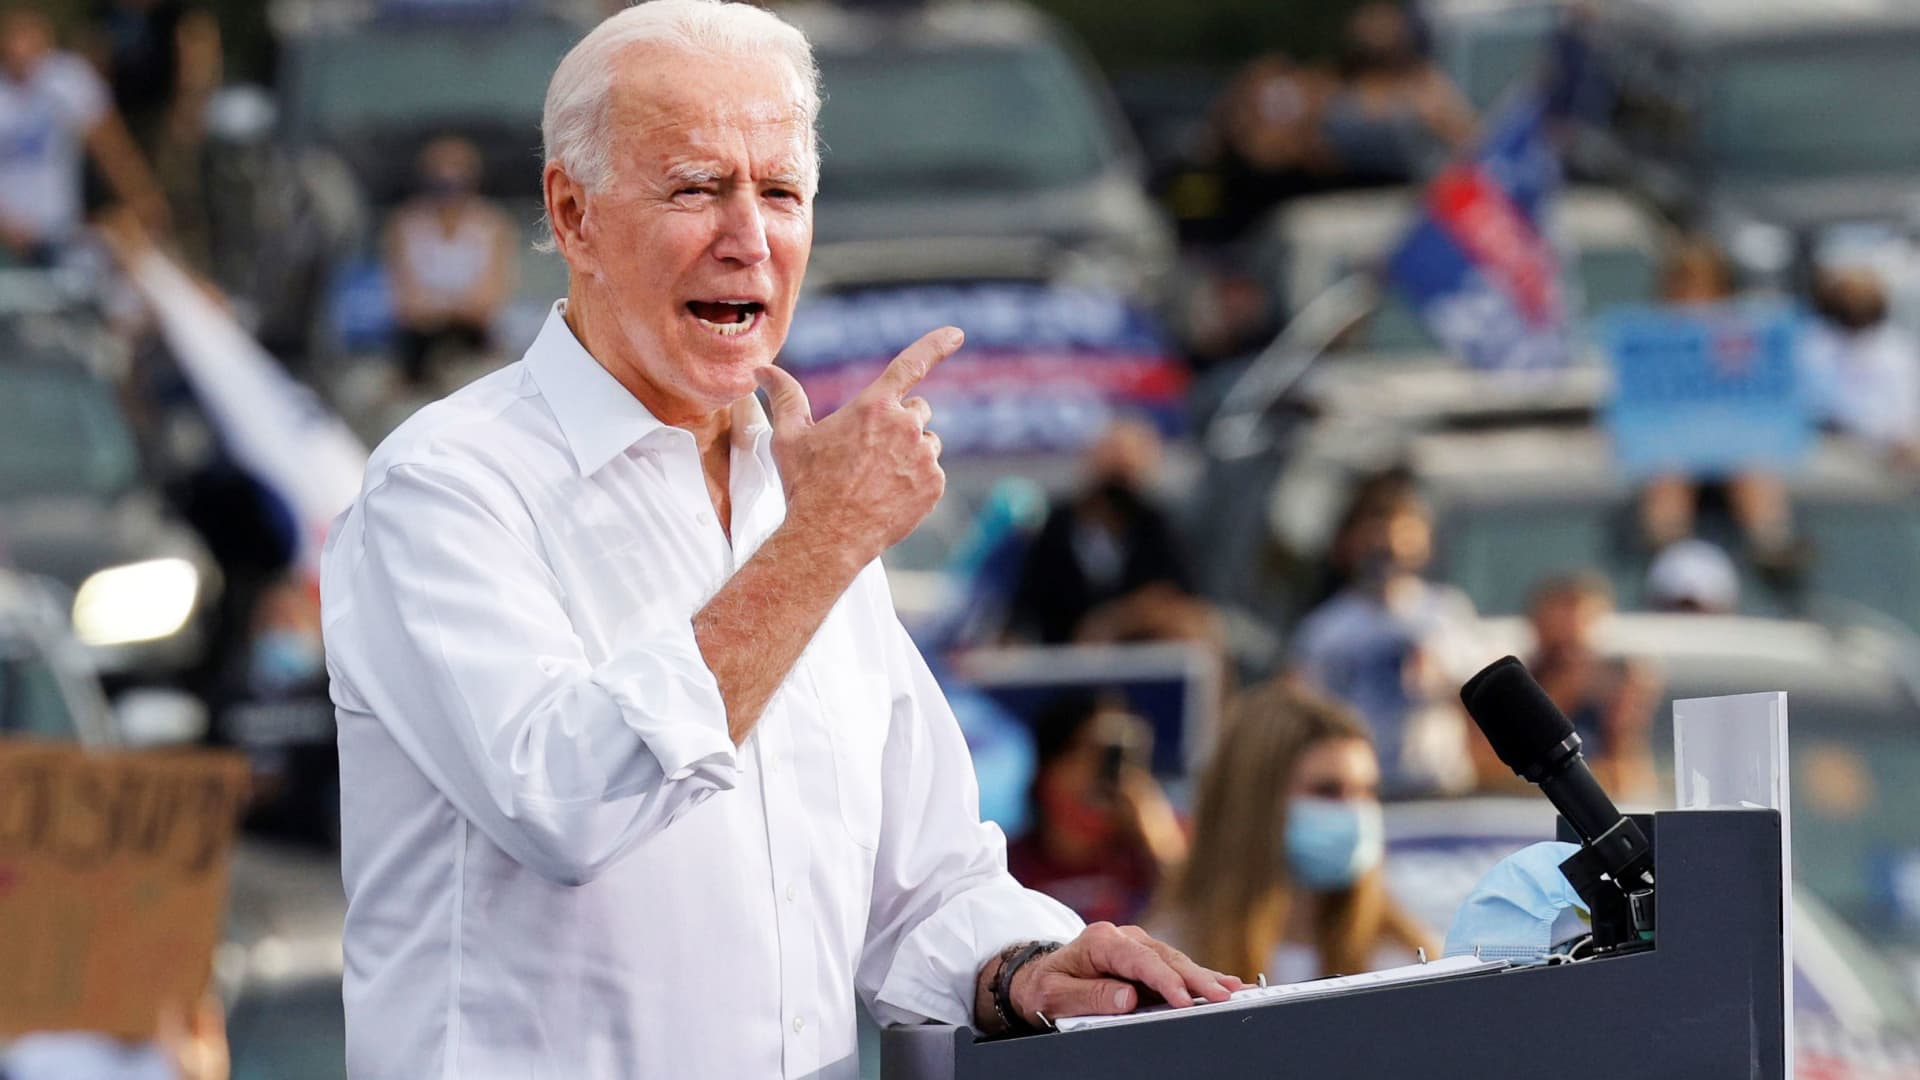 Biden will travel to Georgia to boost Democrats in crucial Senate runoff elections